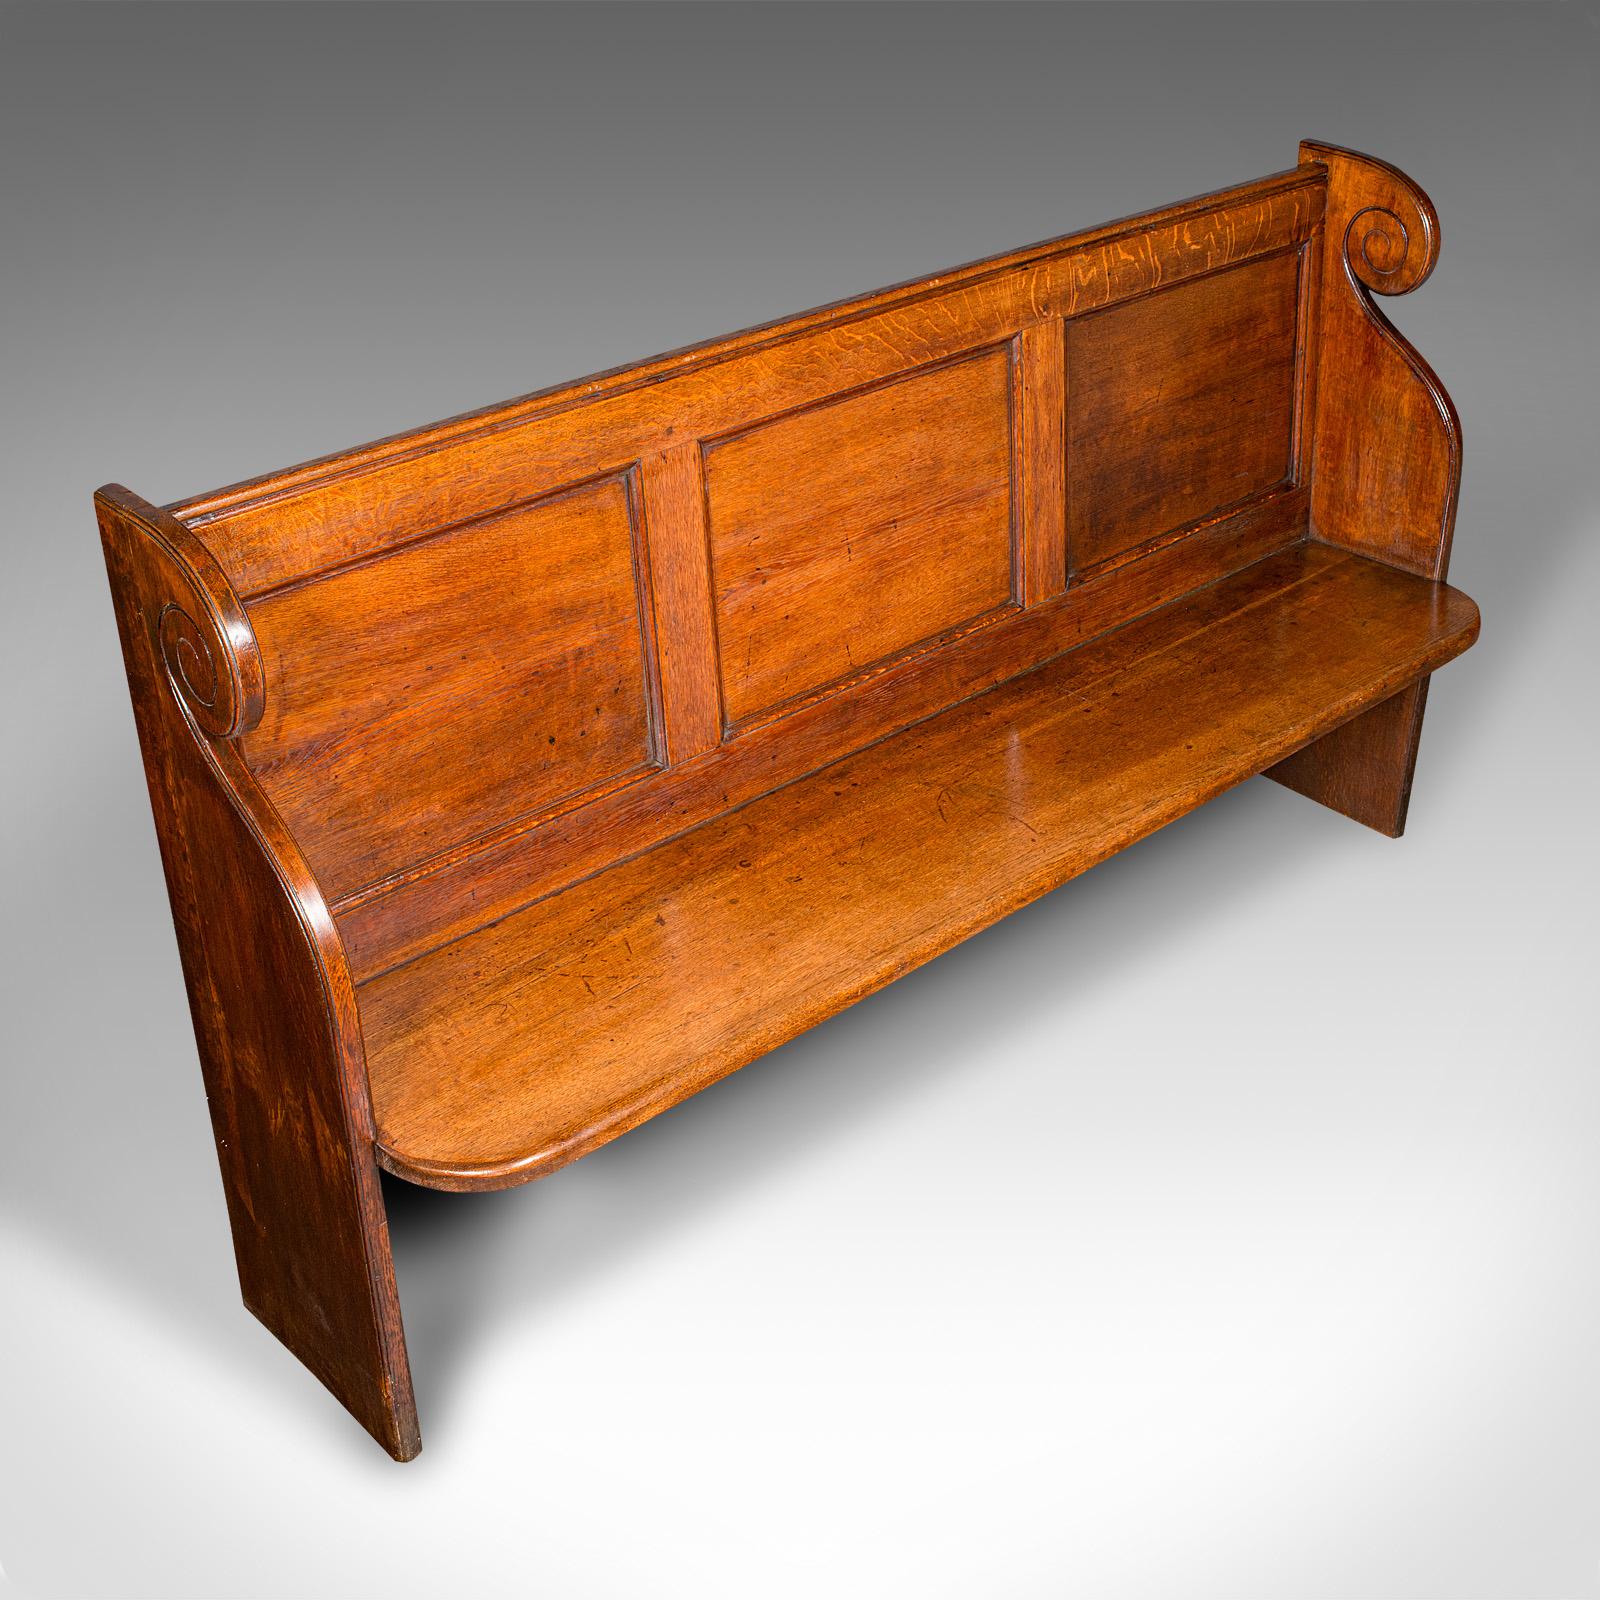 19th Century Antique Panelled Church Pew, English, Oak Bench, Ecclesiastic, Victorian, C.1850 For Sale